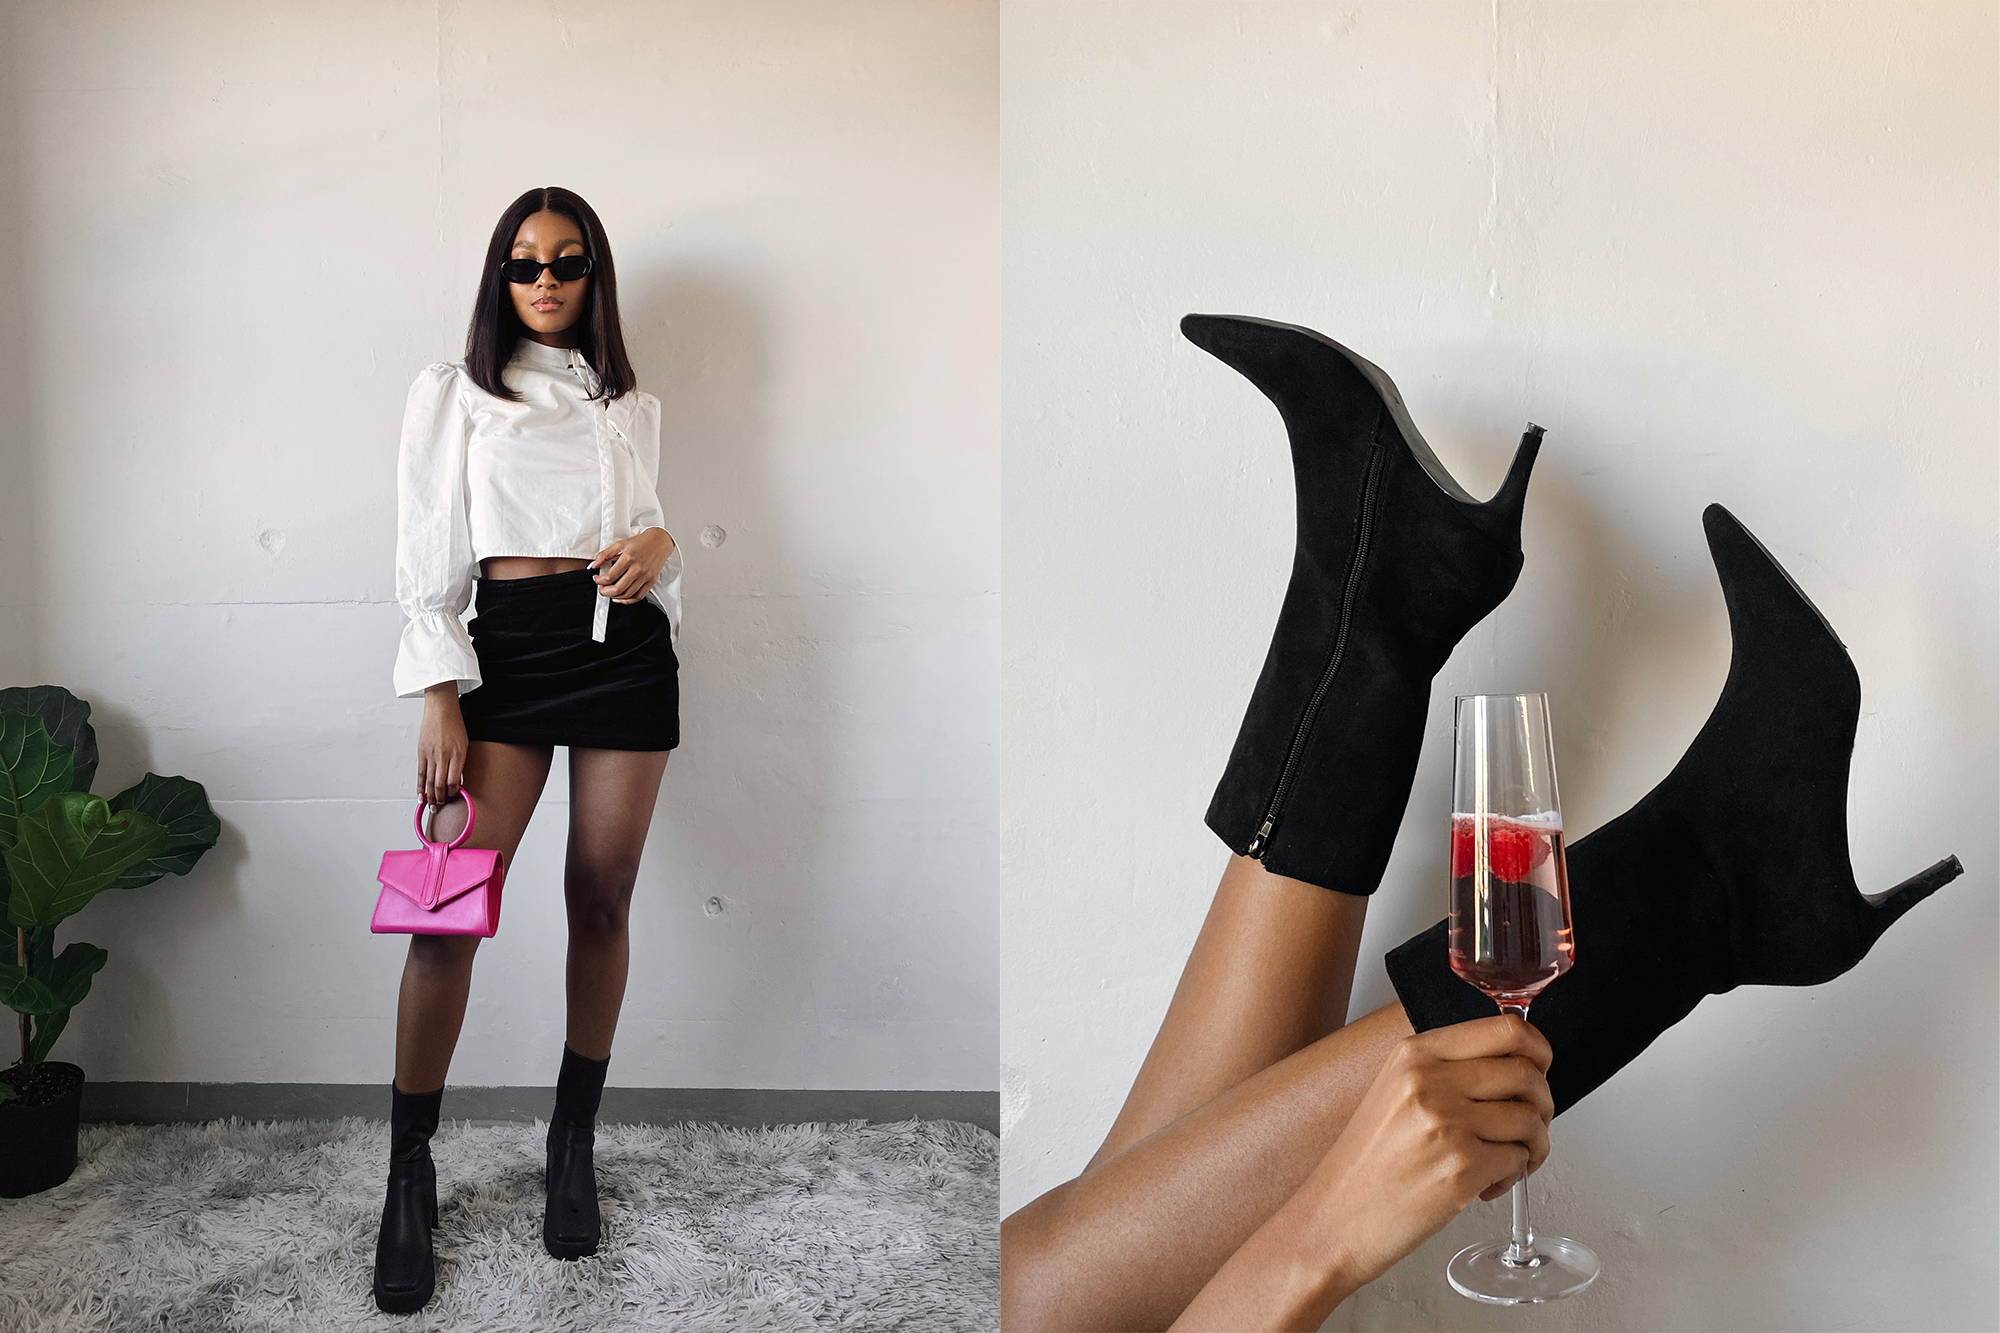 sleek pointed black heeled boots, winter boot trends, boot trends, fashion, style, the suite, the suite edit, brutal fruit